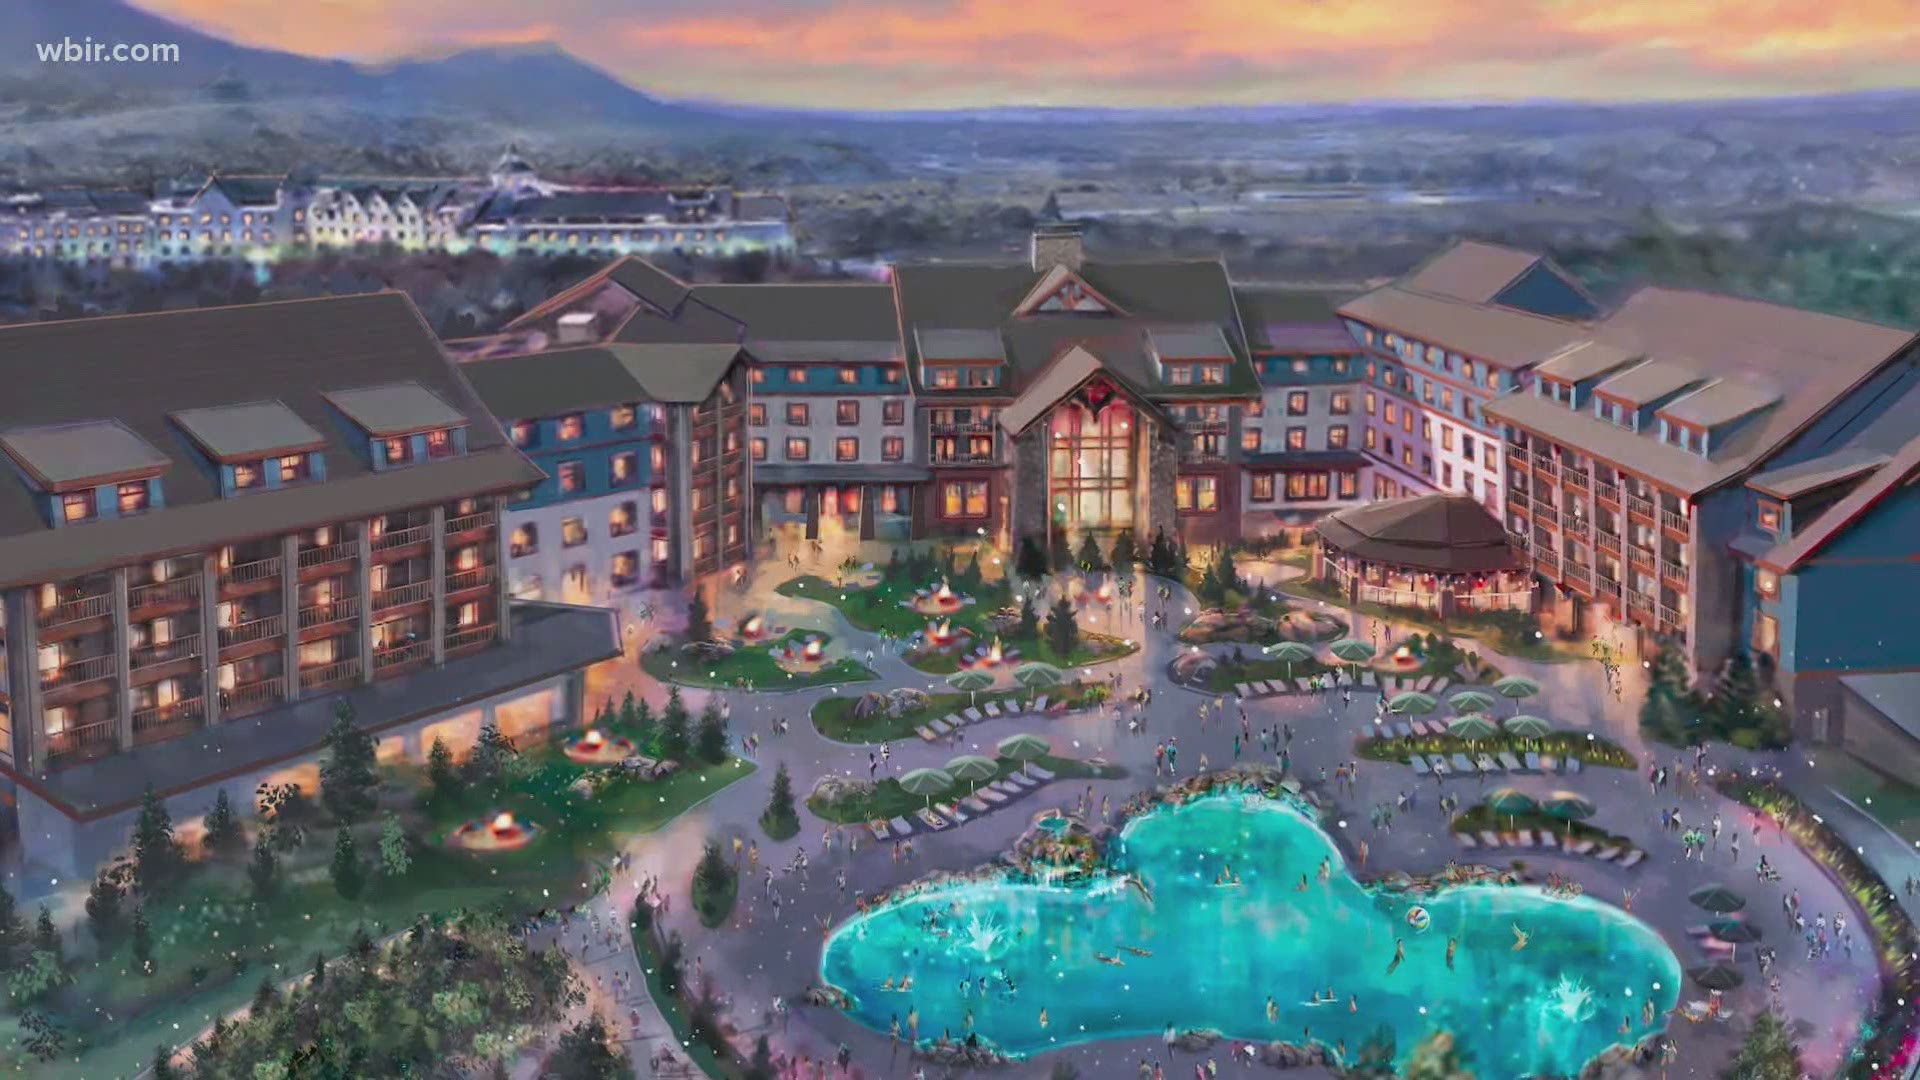 The resort-style lodging will offer multiple options for families. It's set to open in 2023 next to the DreamMore resort.